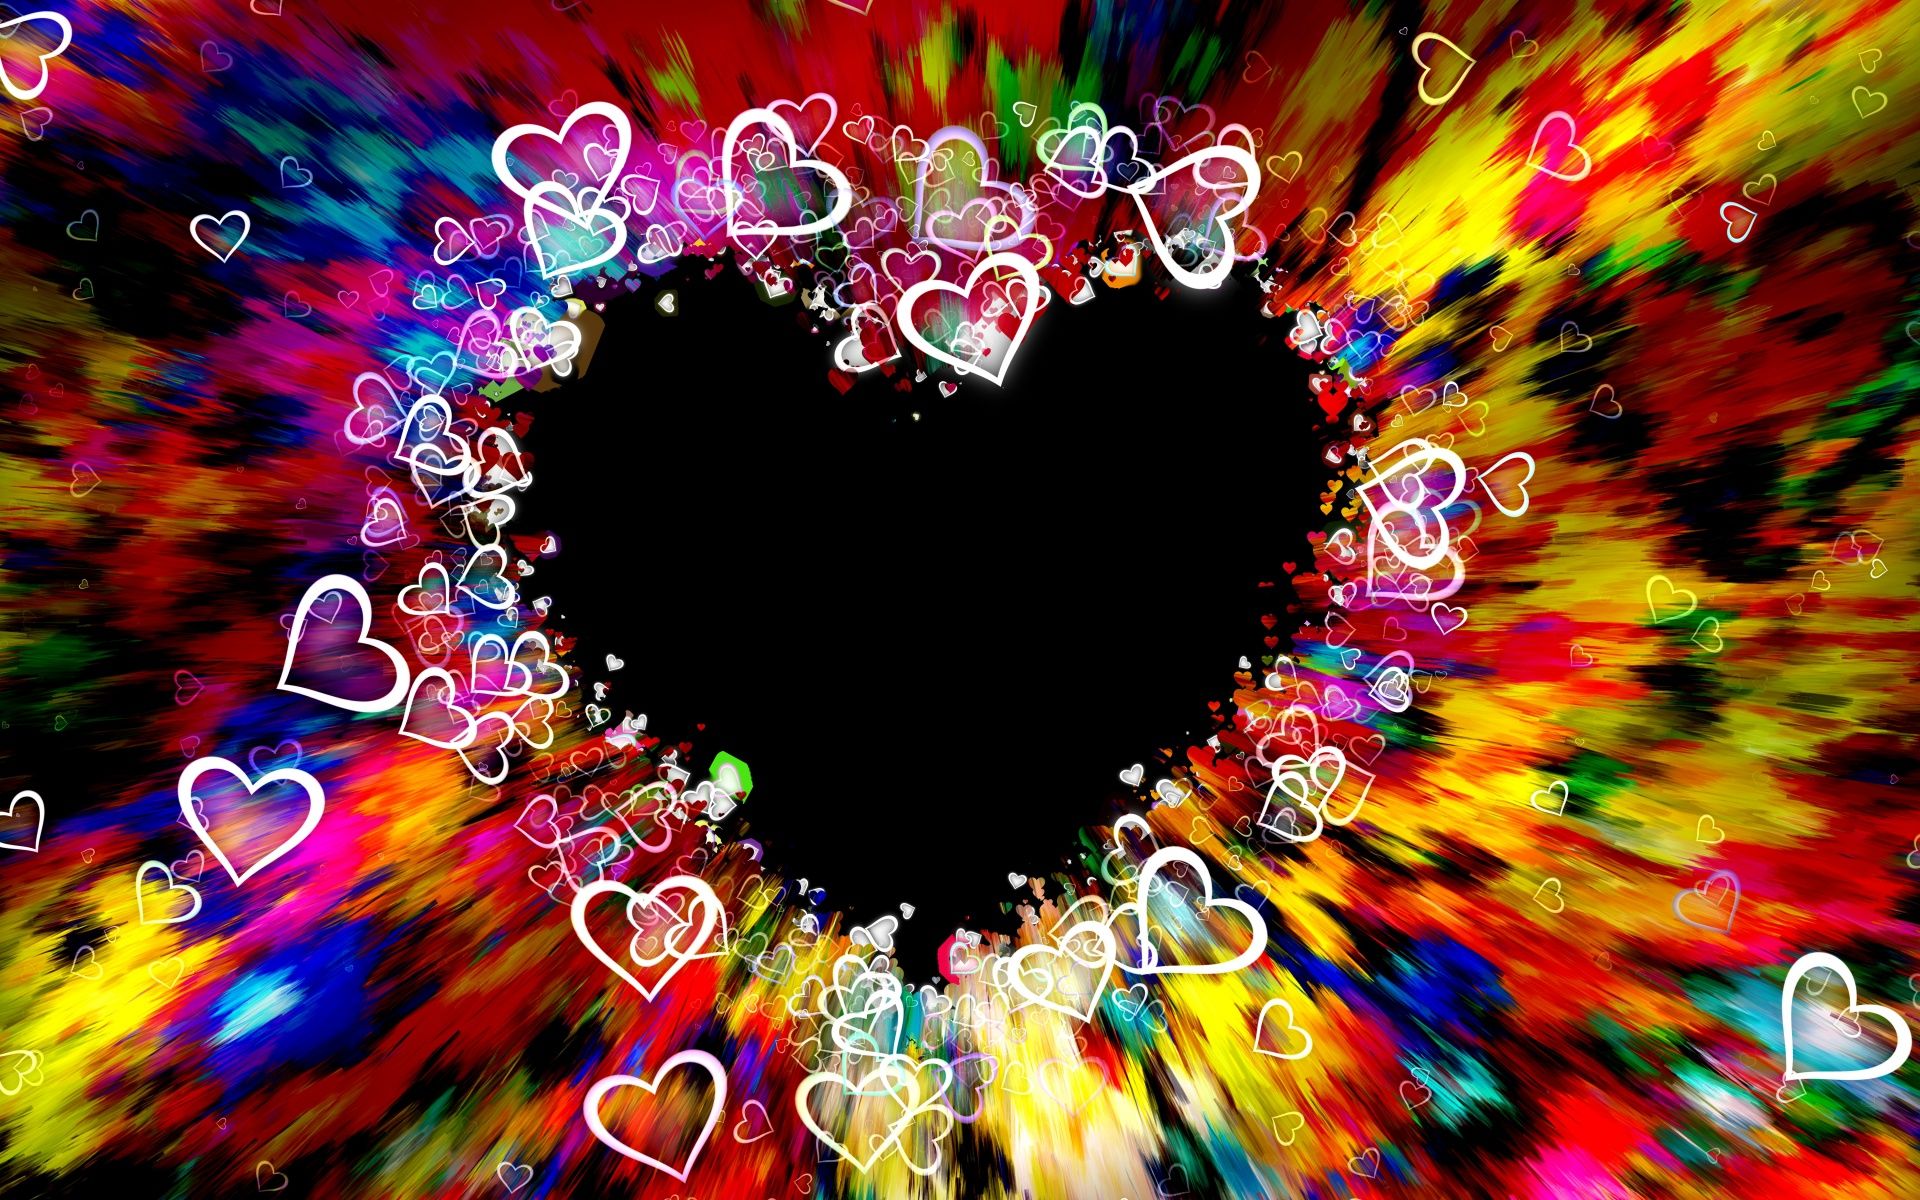 A colorful heart with hearts around it - Heart, colorful